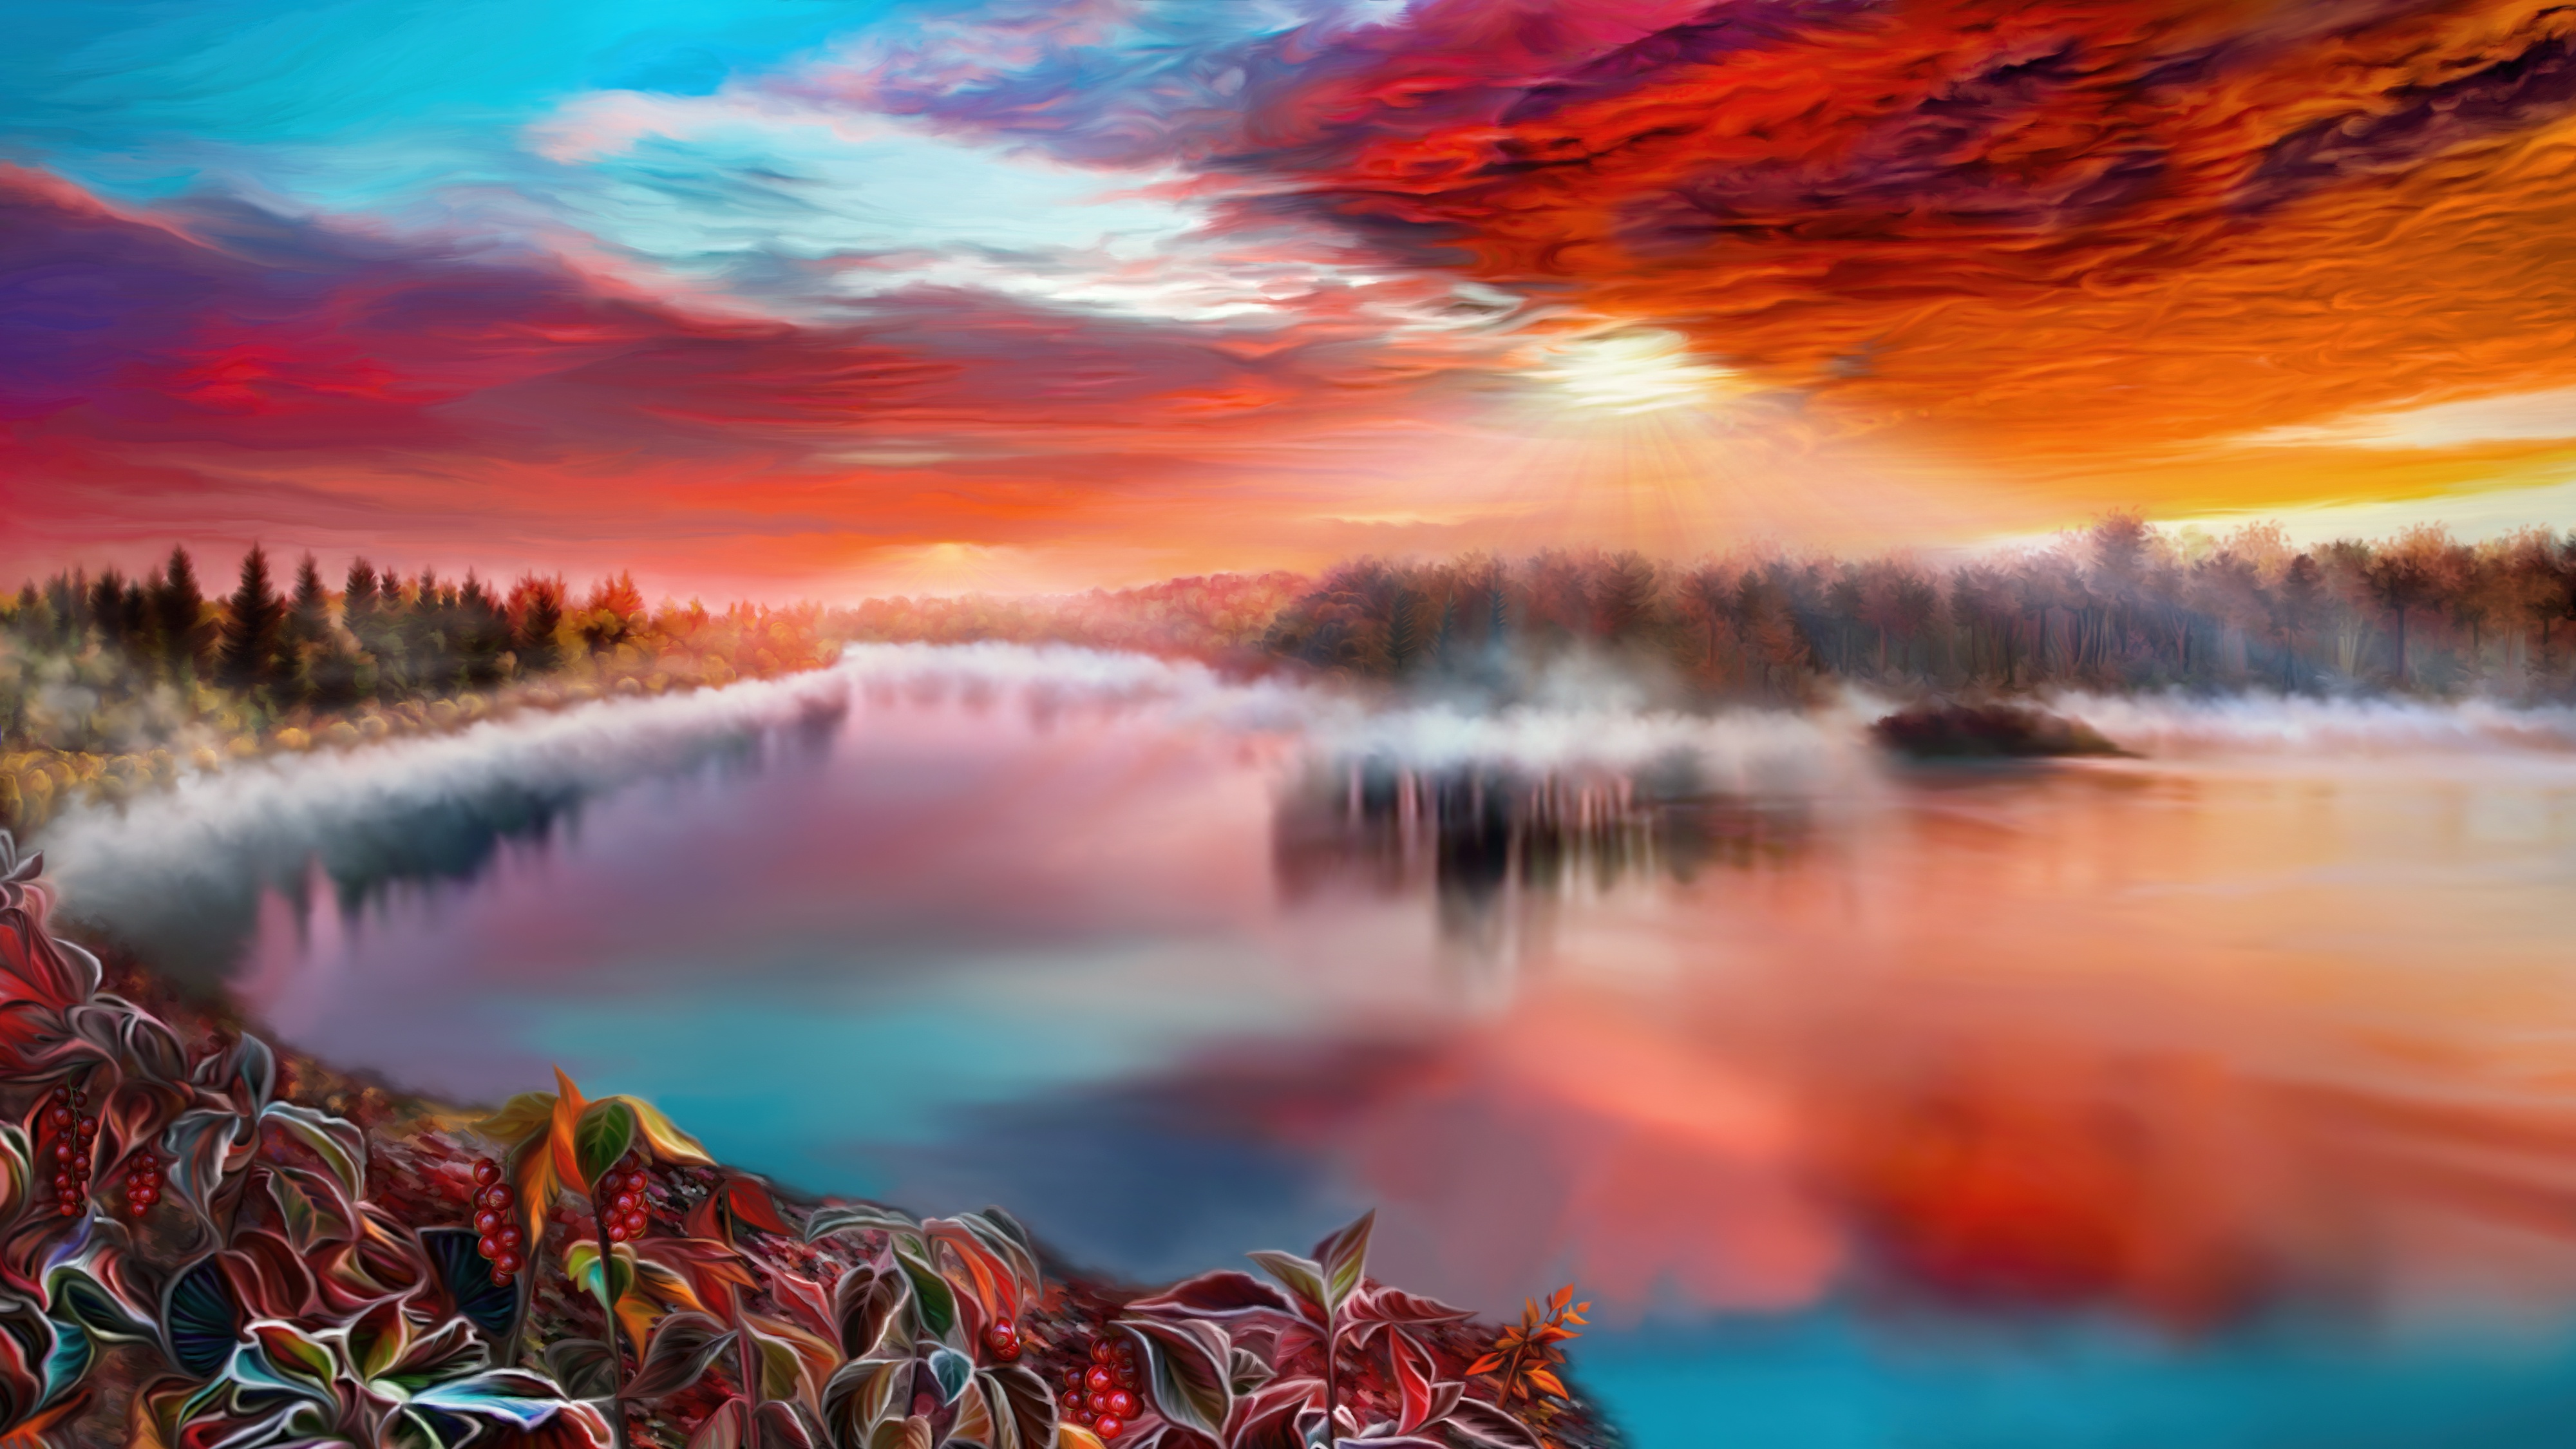 Artistic River HD Wallpaper | Background Image